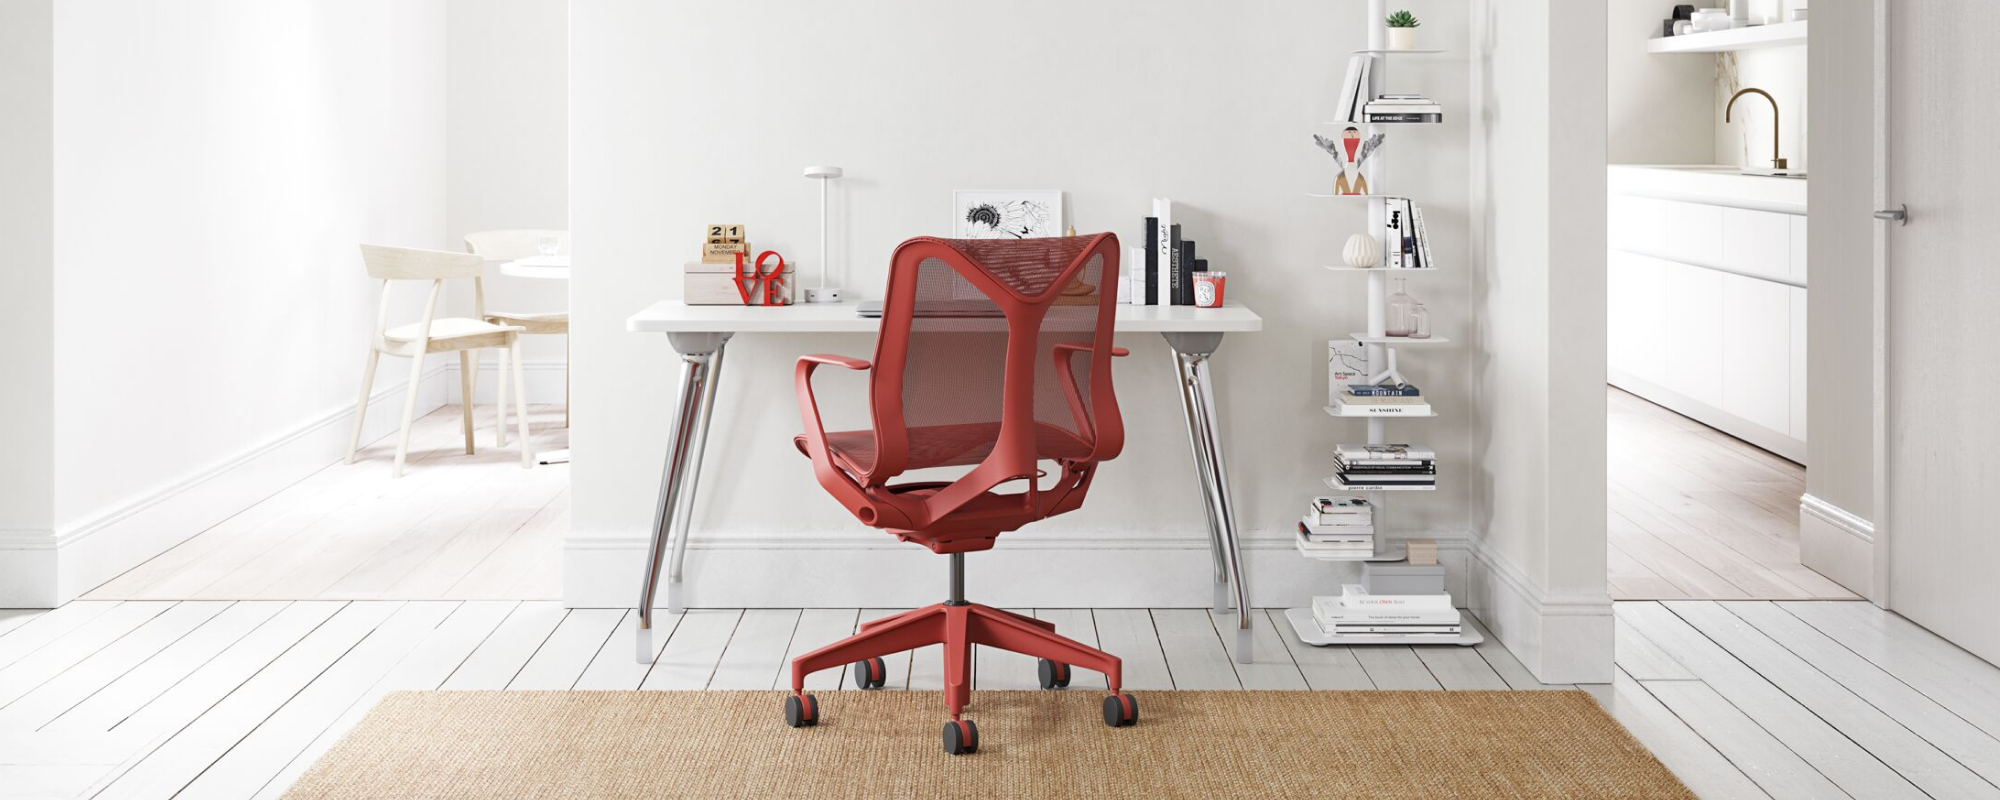 A light home office environment featuring a Canyon Red Low Back Cosm Chair against a white AbakEnvironments Desk with a white Lolly Lamp